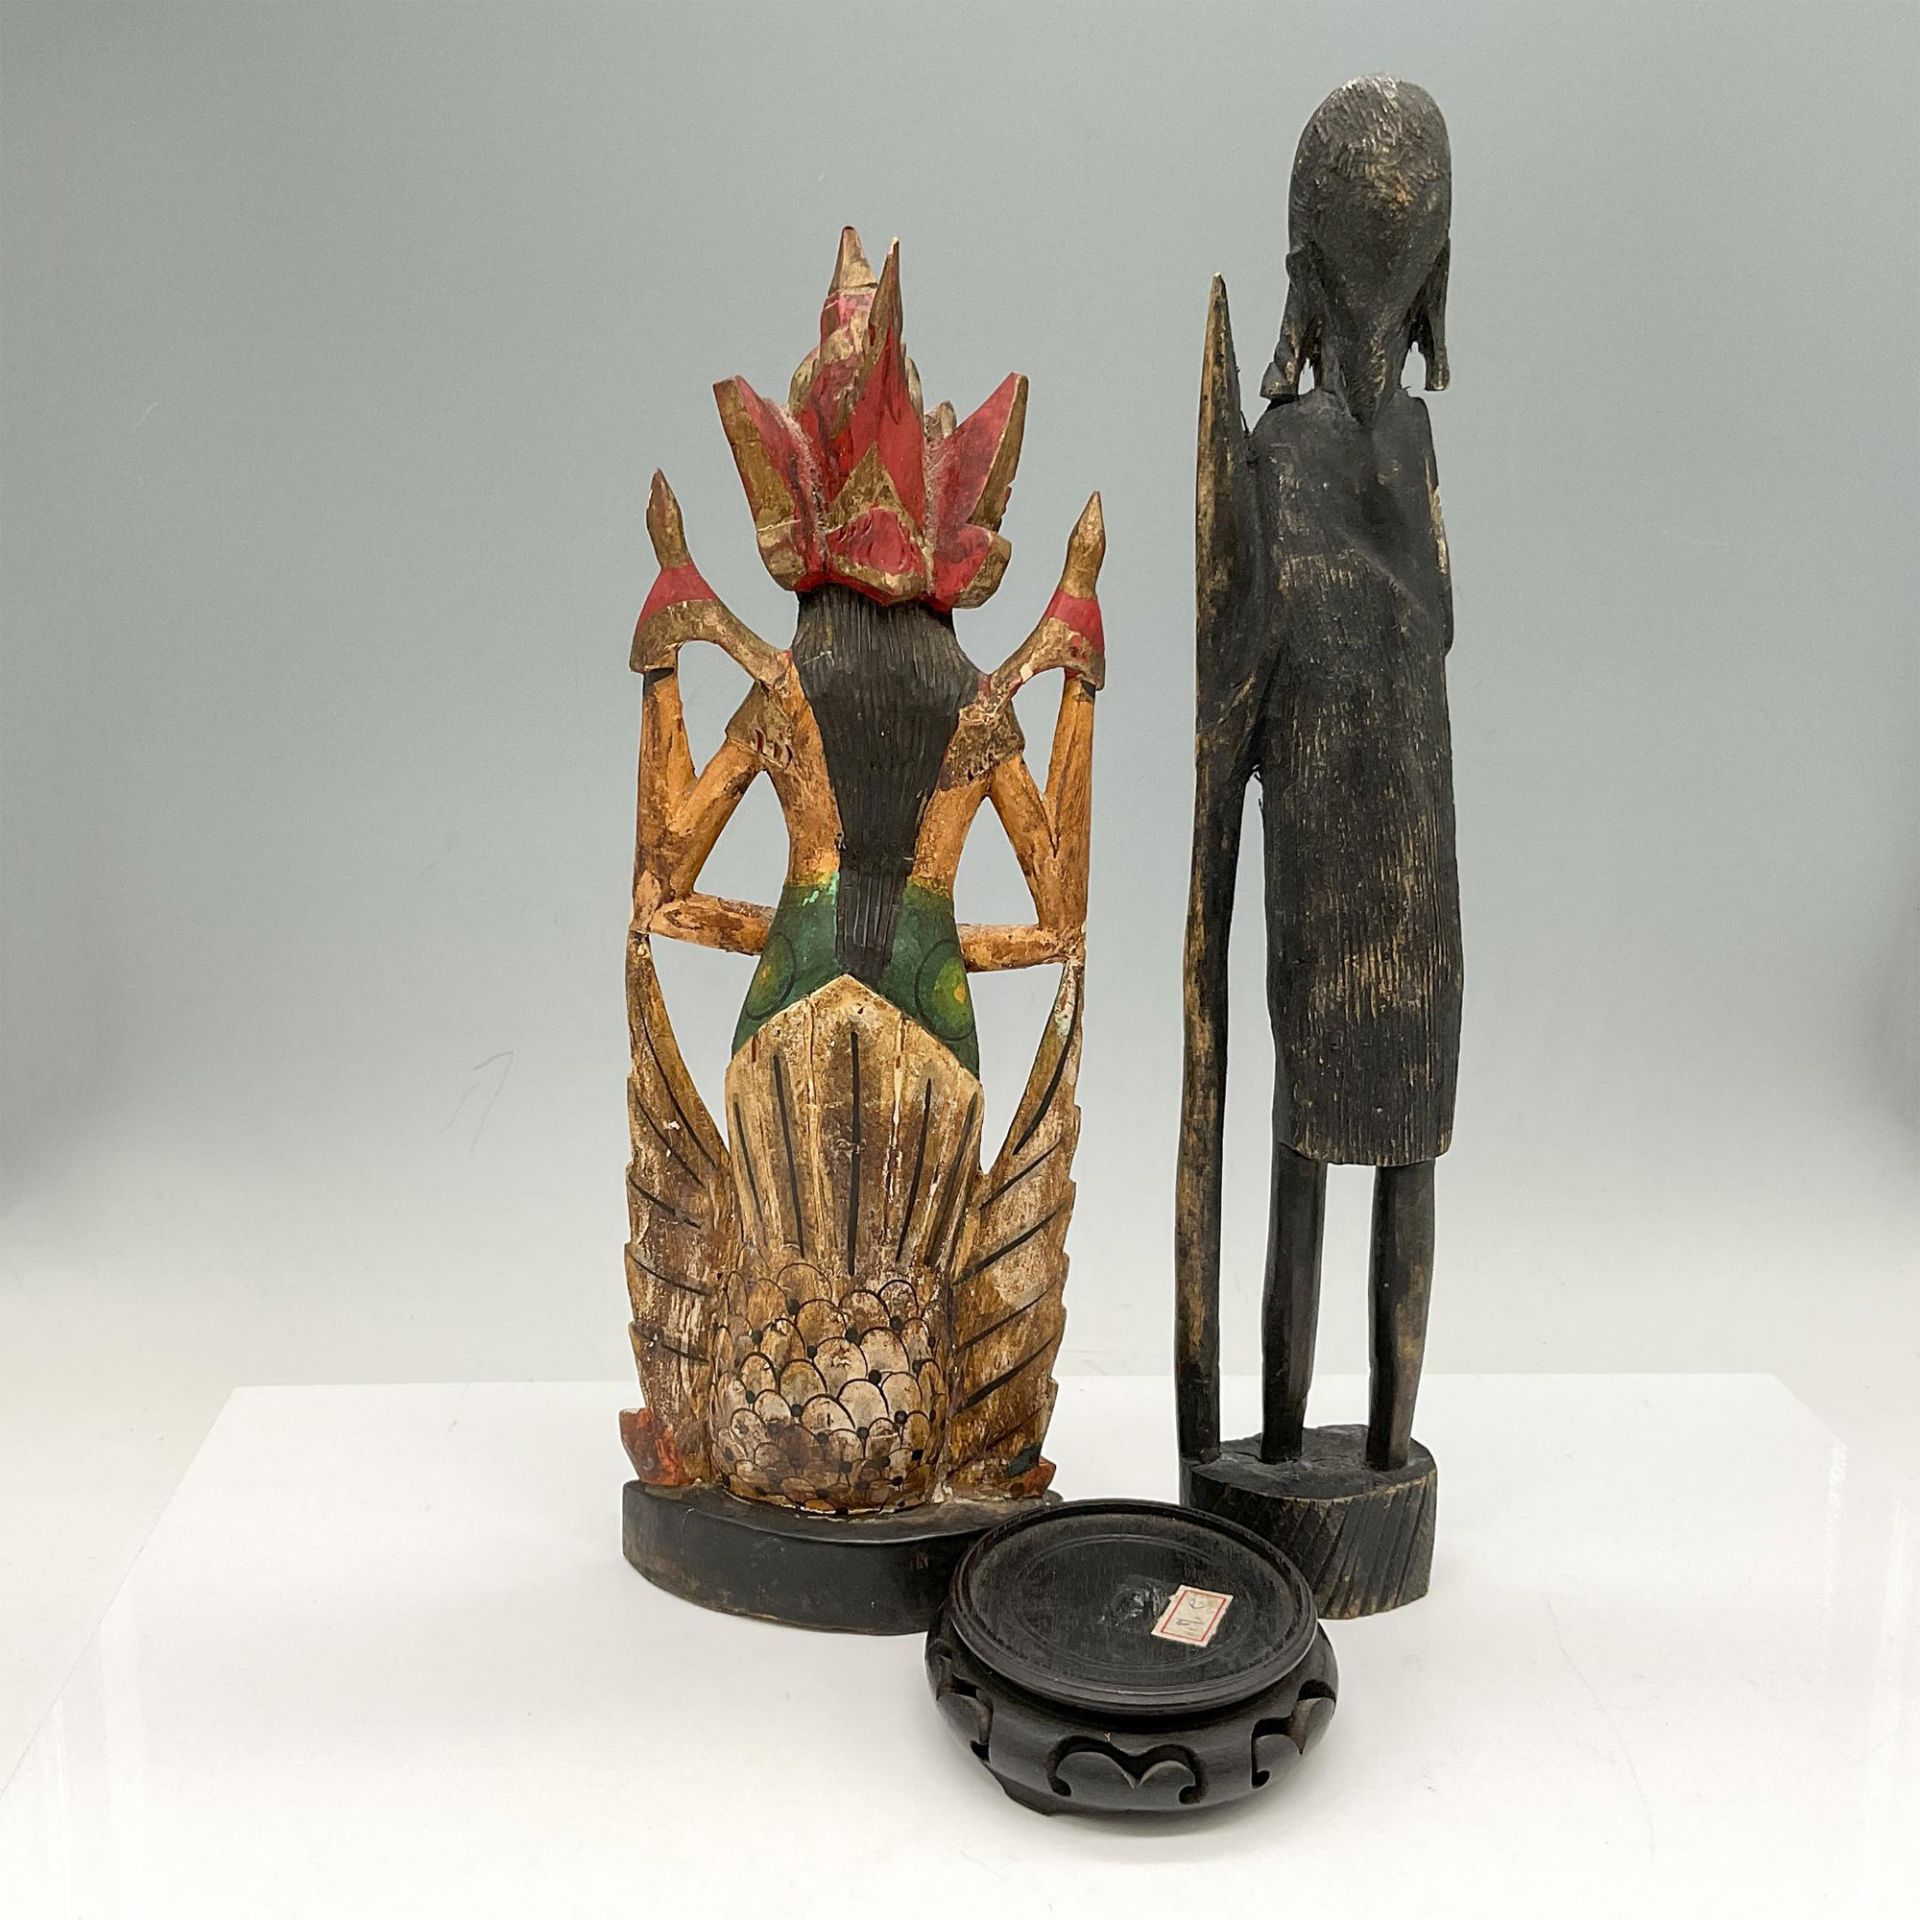 2pc Indonesian and African Wood Sculptures - Image 2 of 3